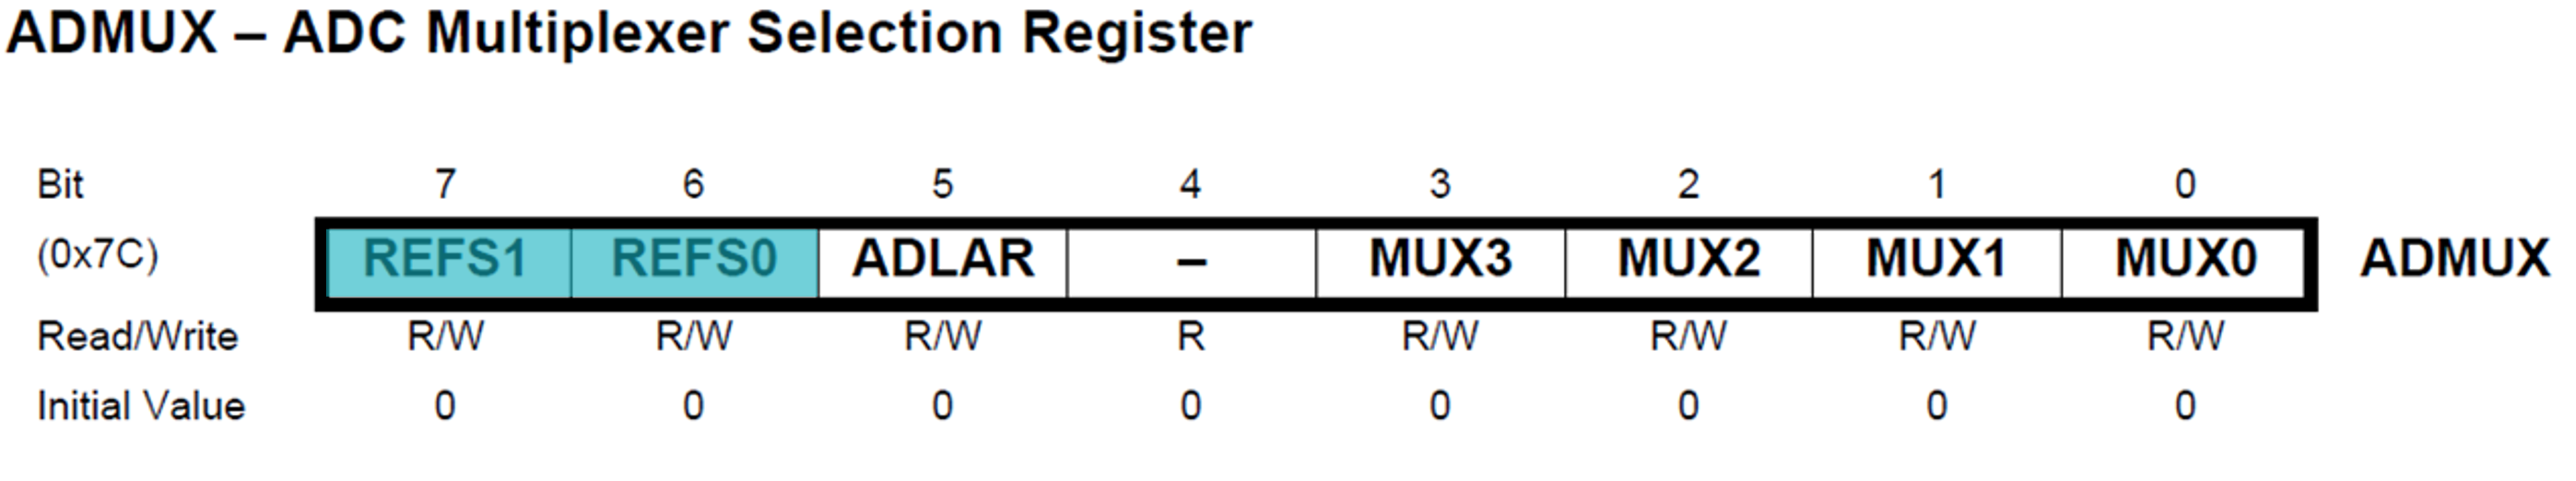 The ADMUX Register with bits 7 and 6 highlighted